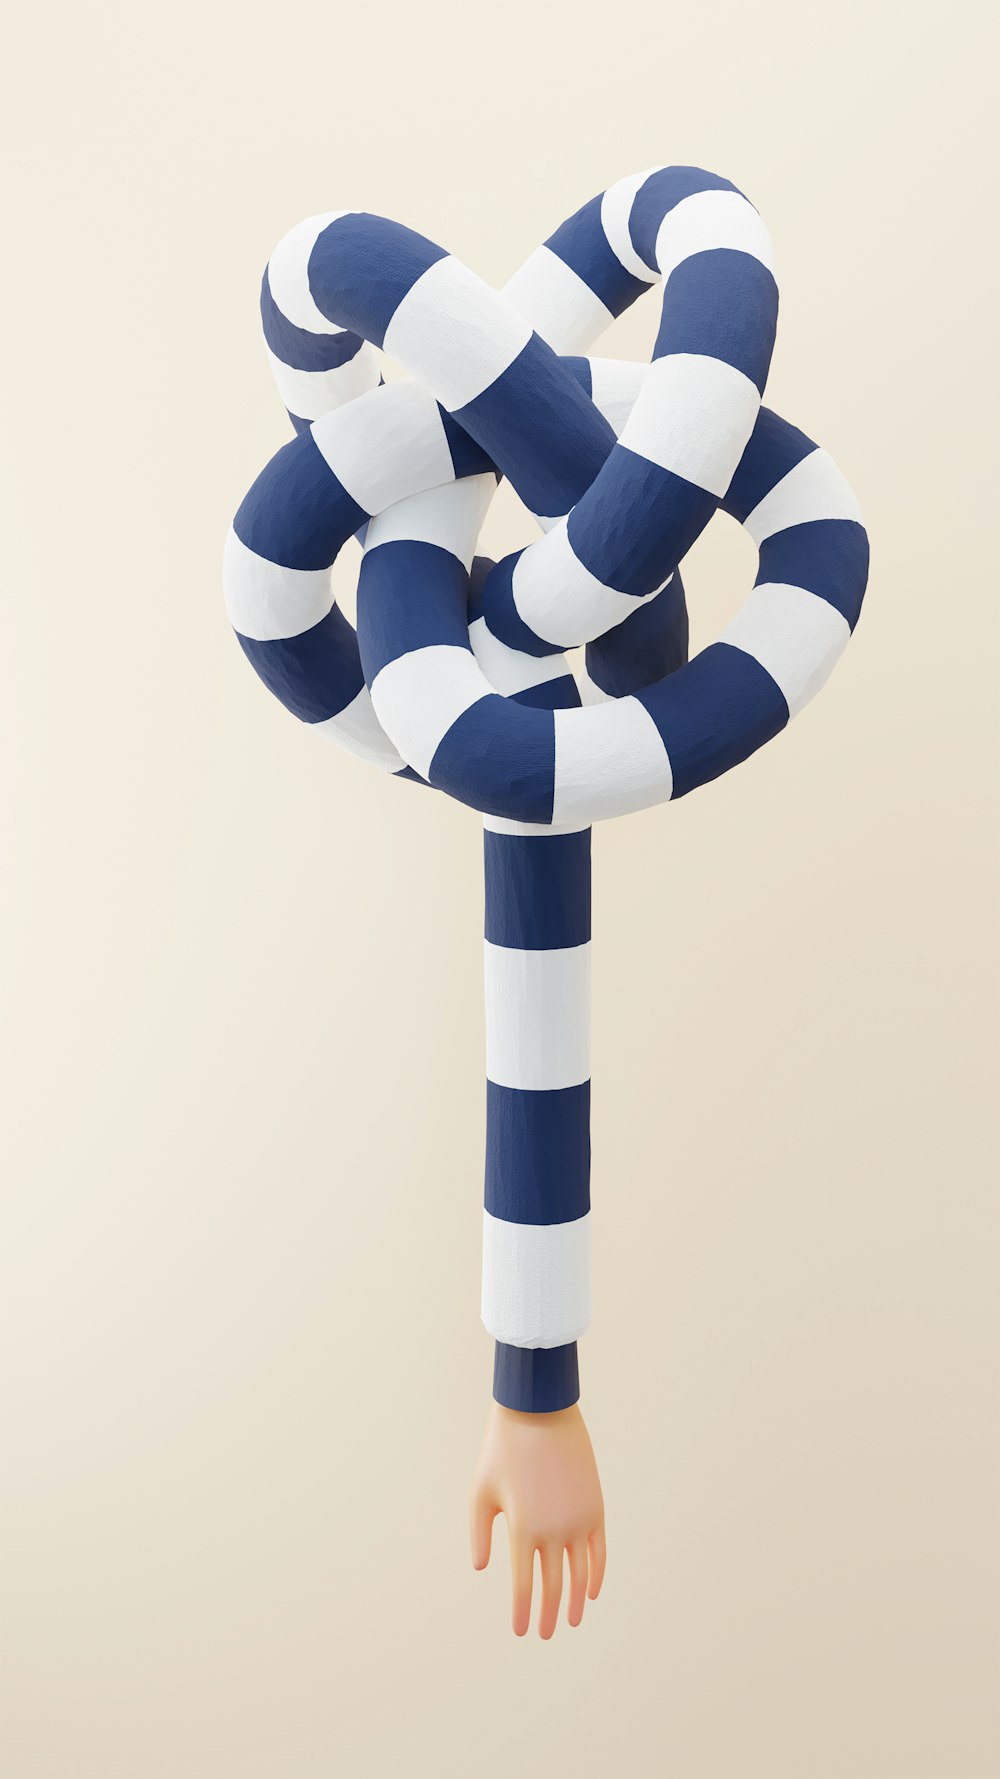 a blue and white striped object floating in the air